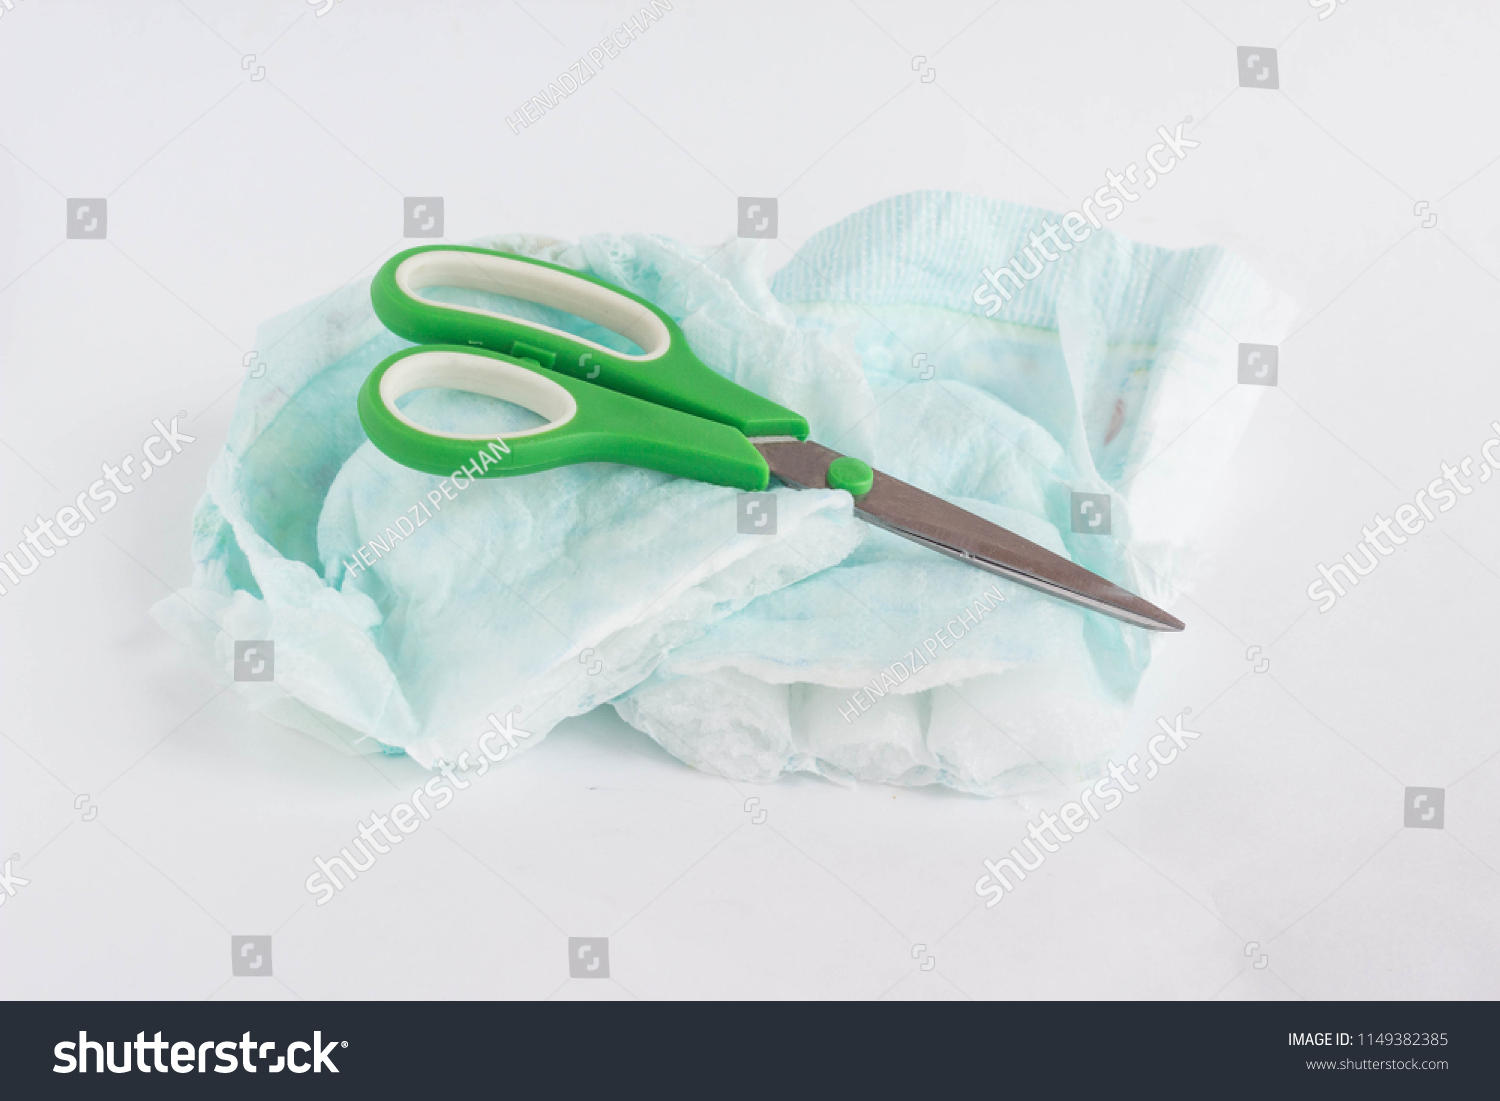 Sliced child pampers and scissors on a white background, diapers #1149382385